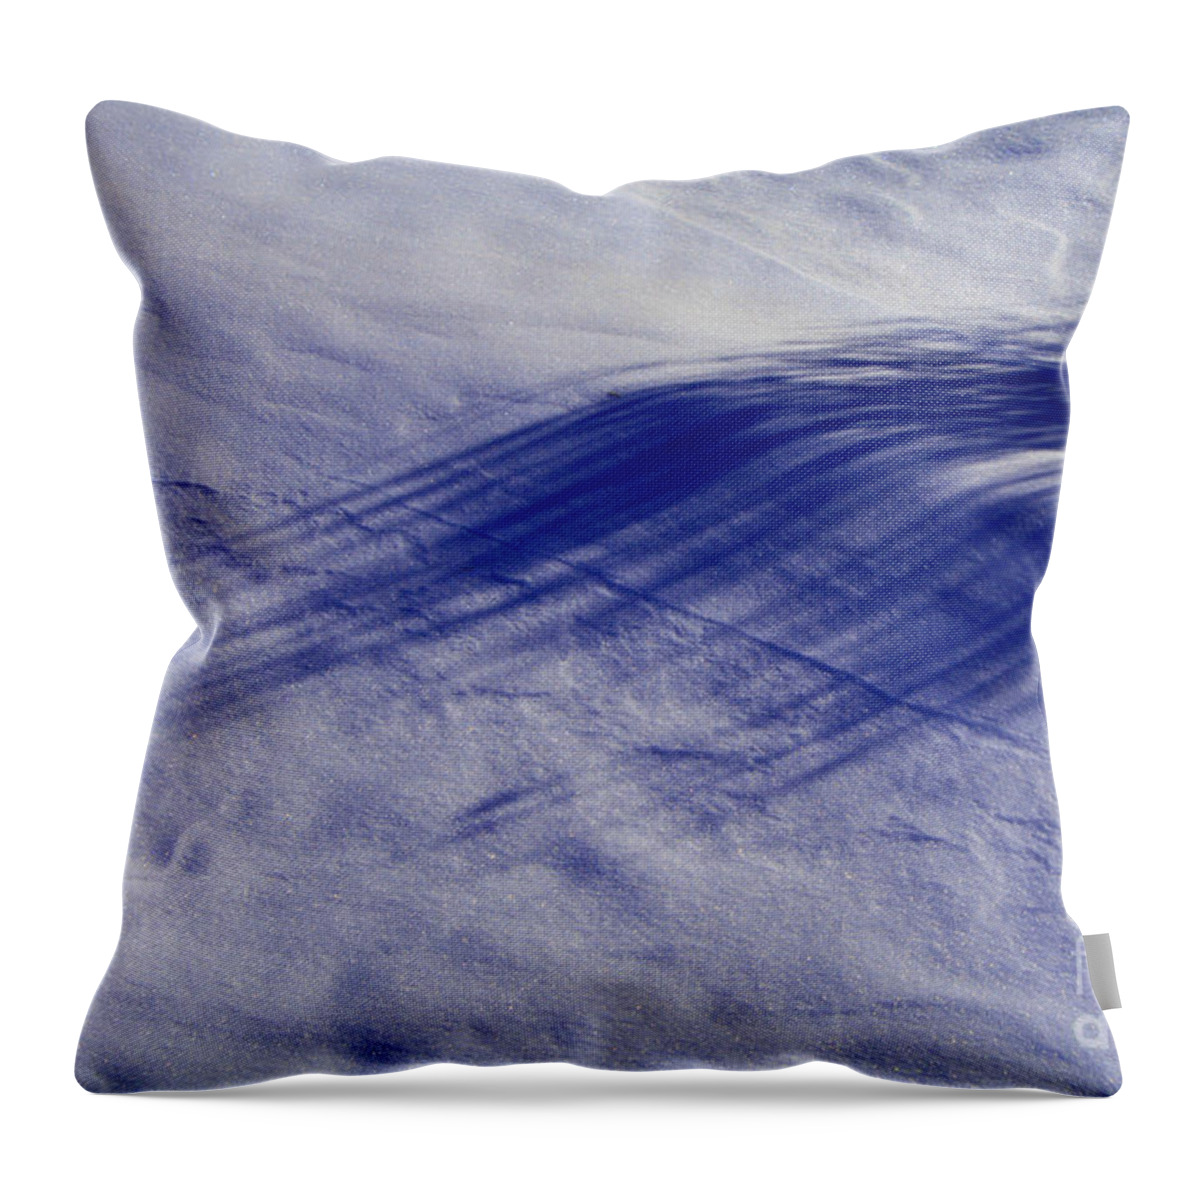 Roena King Throw Pillow featuring the photograph Long Shadows by Roena King